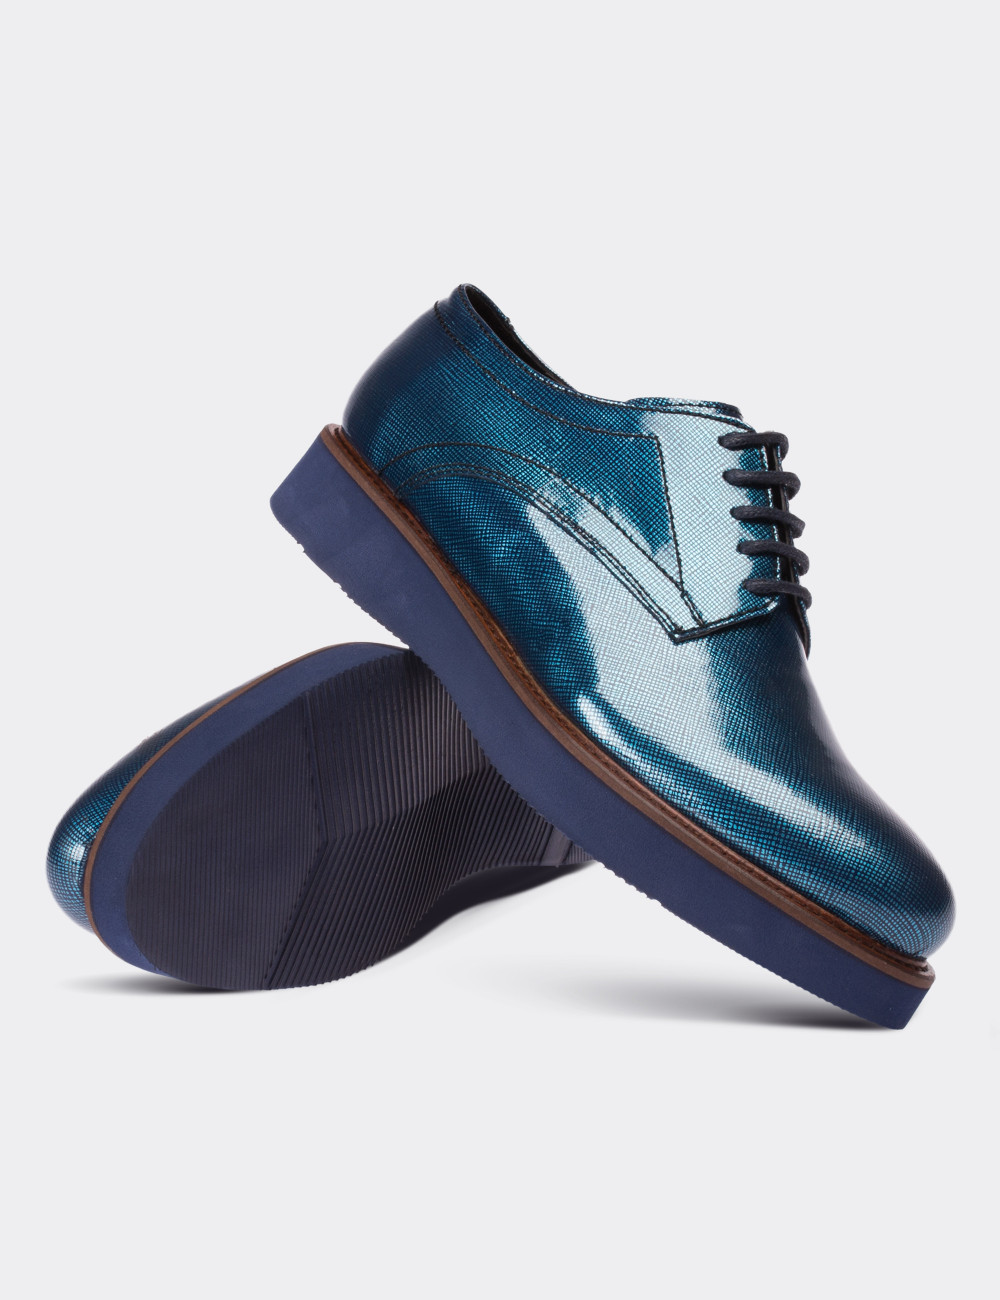 Blue Patent Leather Lace-up Shoes - 01430ZMVIE02